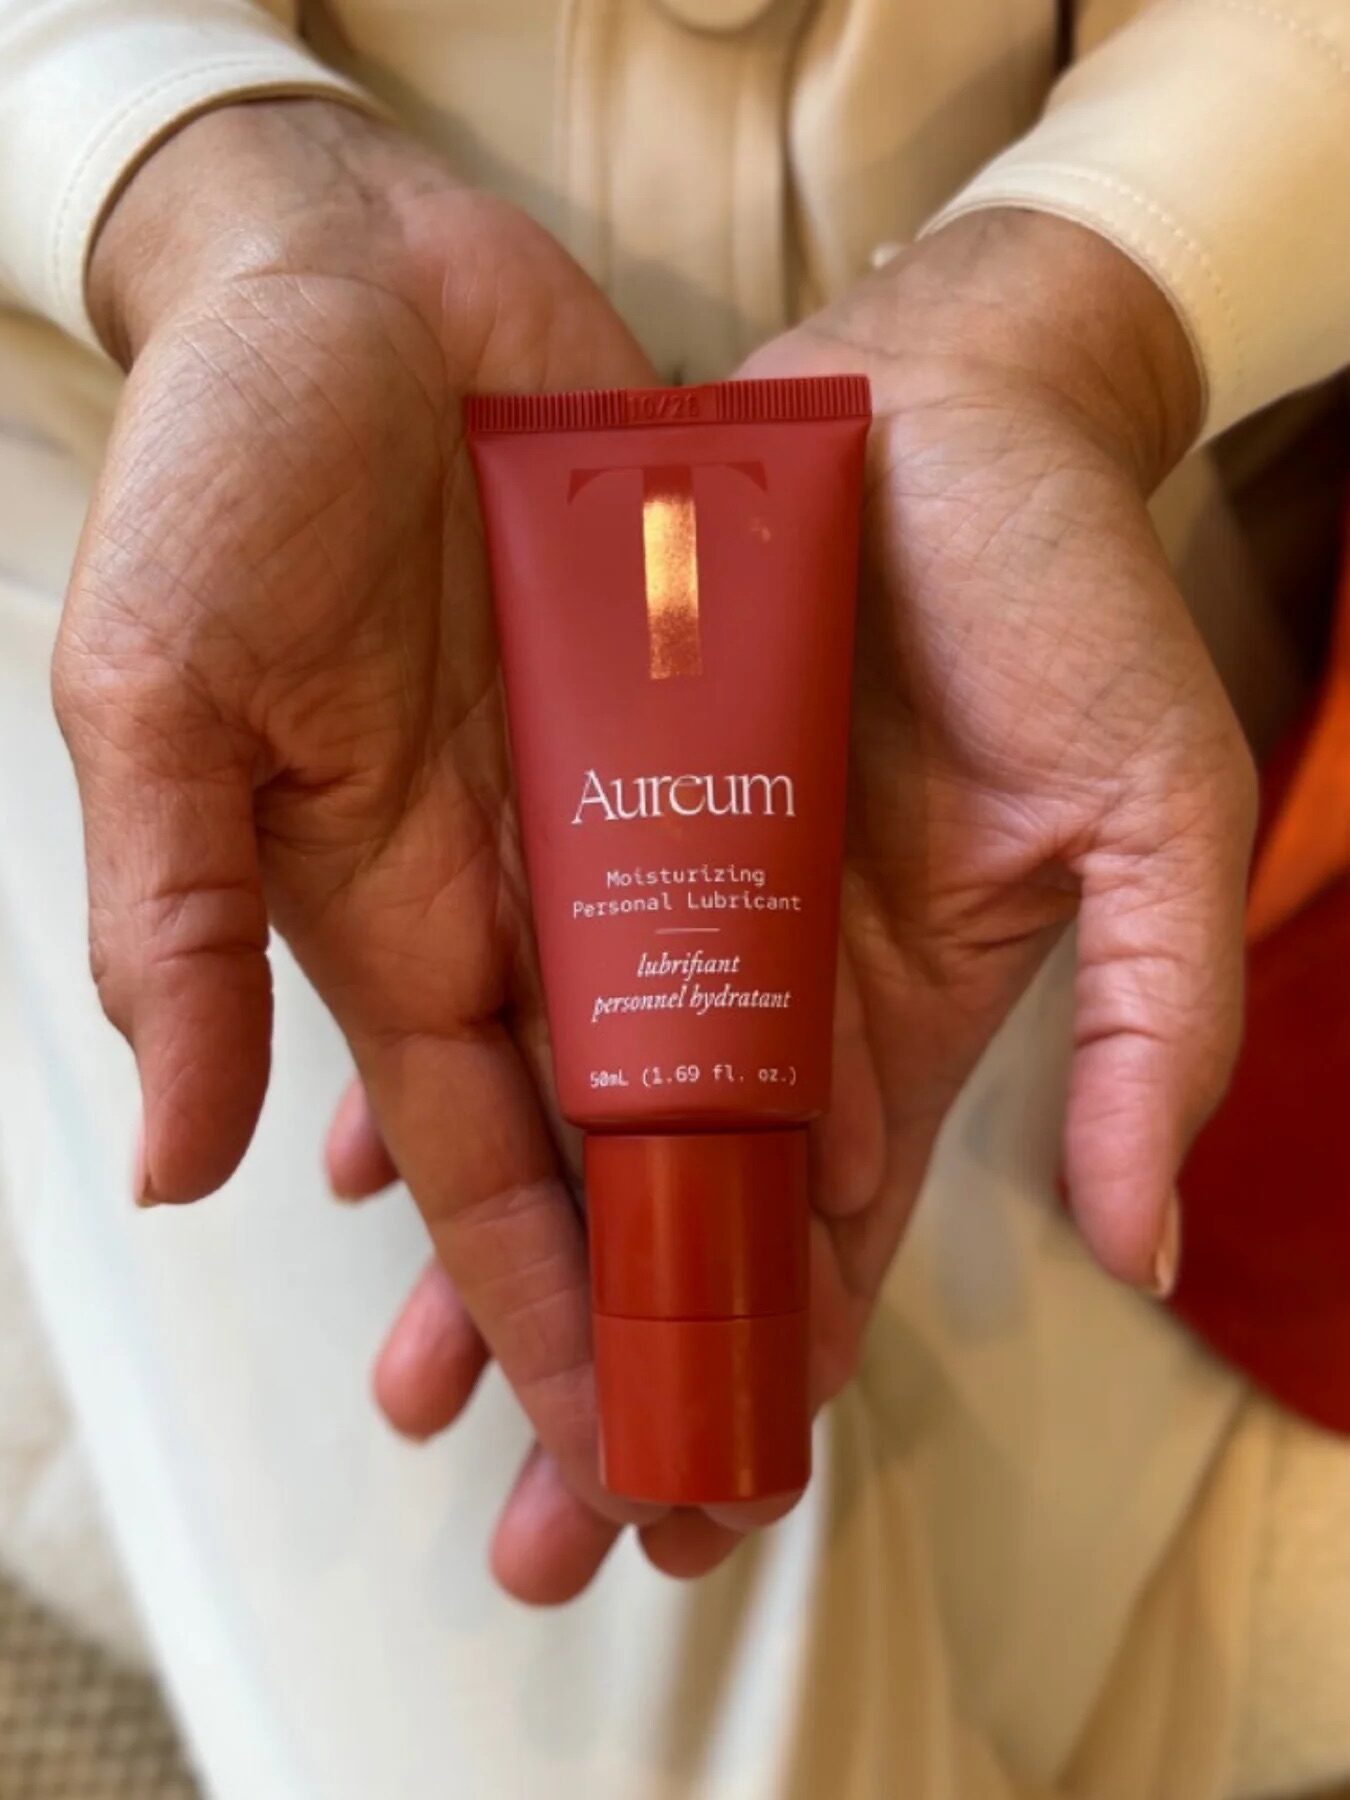 Close-up of a person holding a tube of Aureum Moisturizing Personal Lubricant in their hands, displaying the product label clearly.